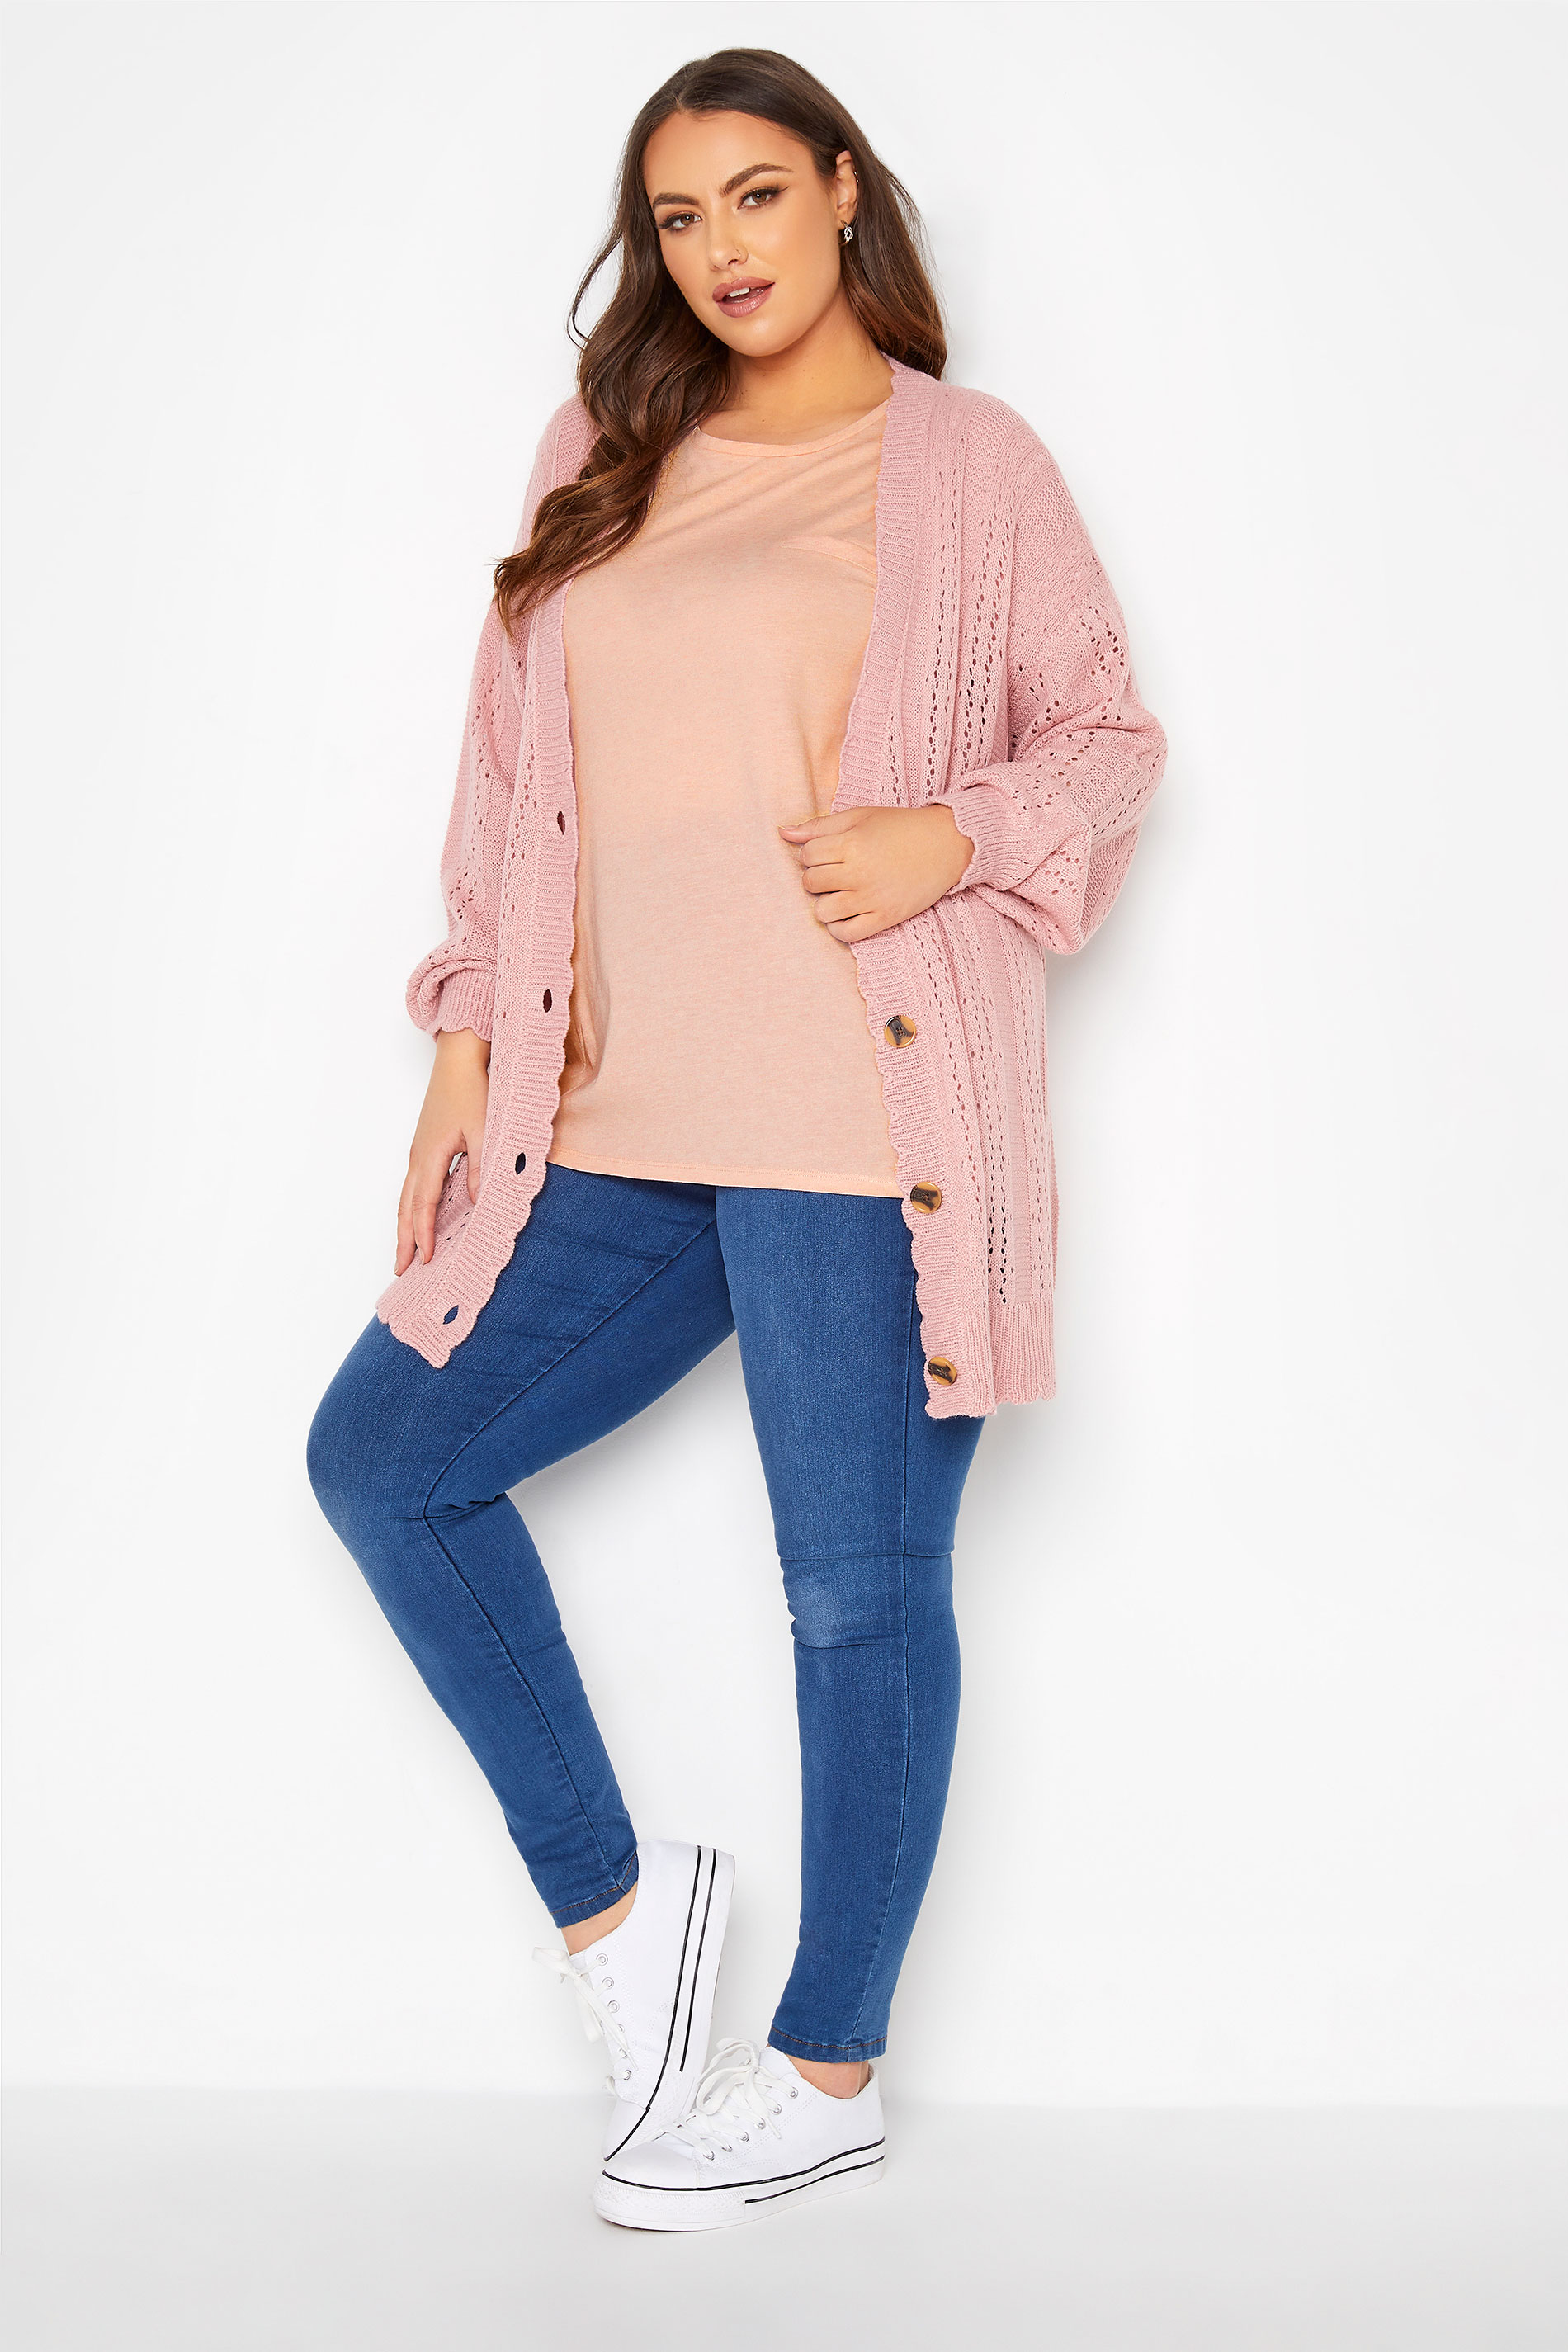 Grande taille  Tops Grande taille  Tops Casual | YOURS FOR GOOD - T-Shirt Rose Pâle en Coton Mixte - NT08236